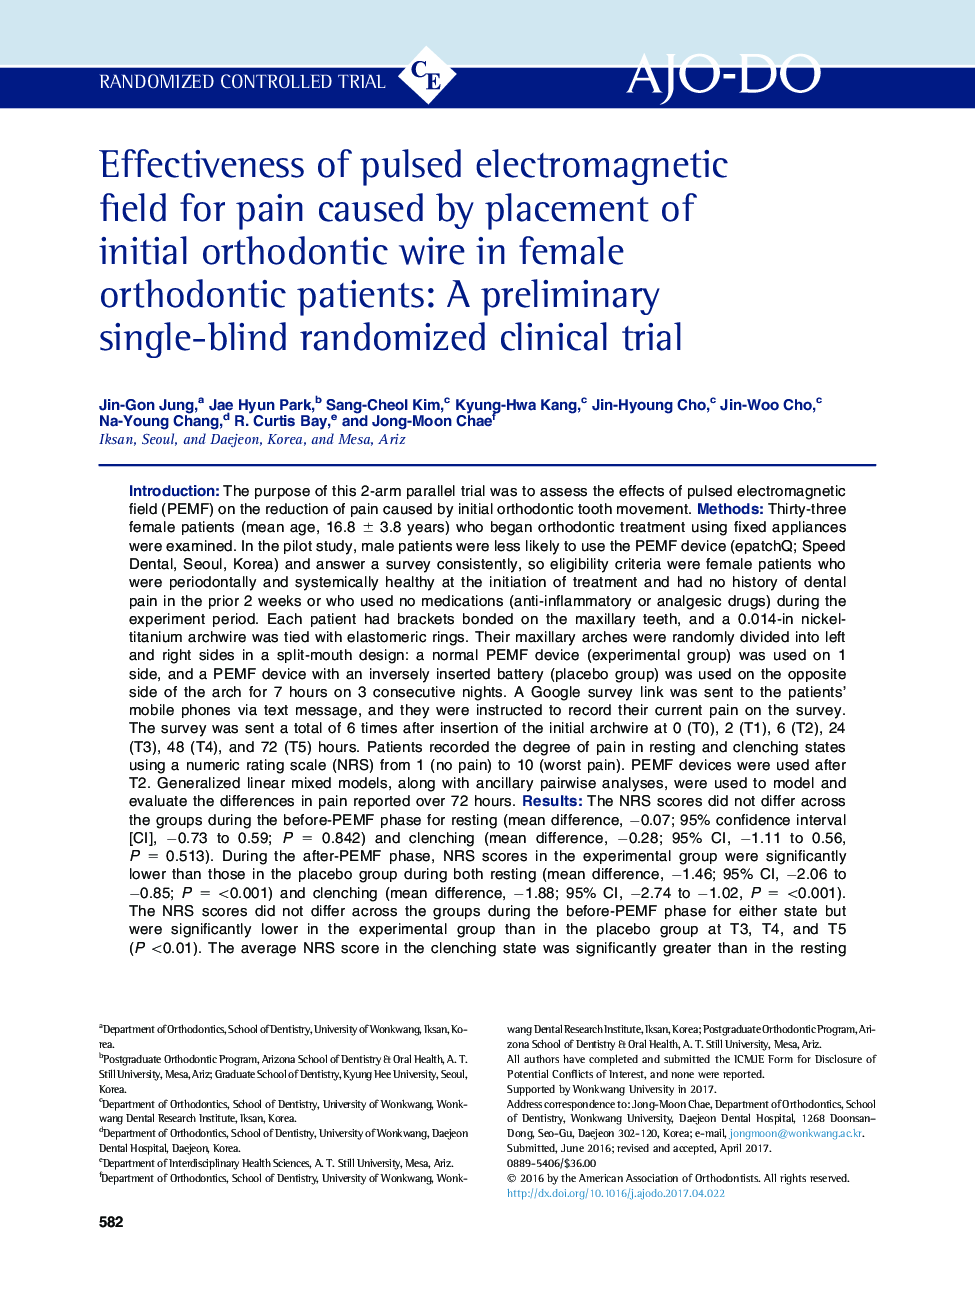 Effectiveness of pulsed electromagnetic field for pain caused by placement of initial orthodontic wire in female orthodontic patients: A preliminary single-blind randomized clinical trial